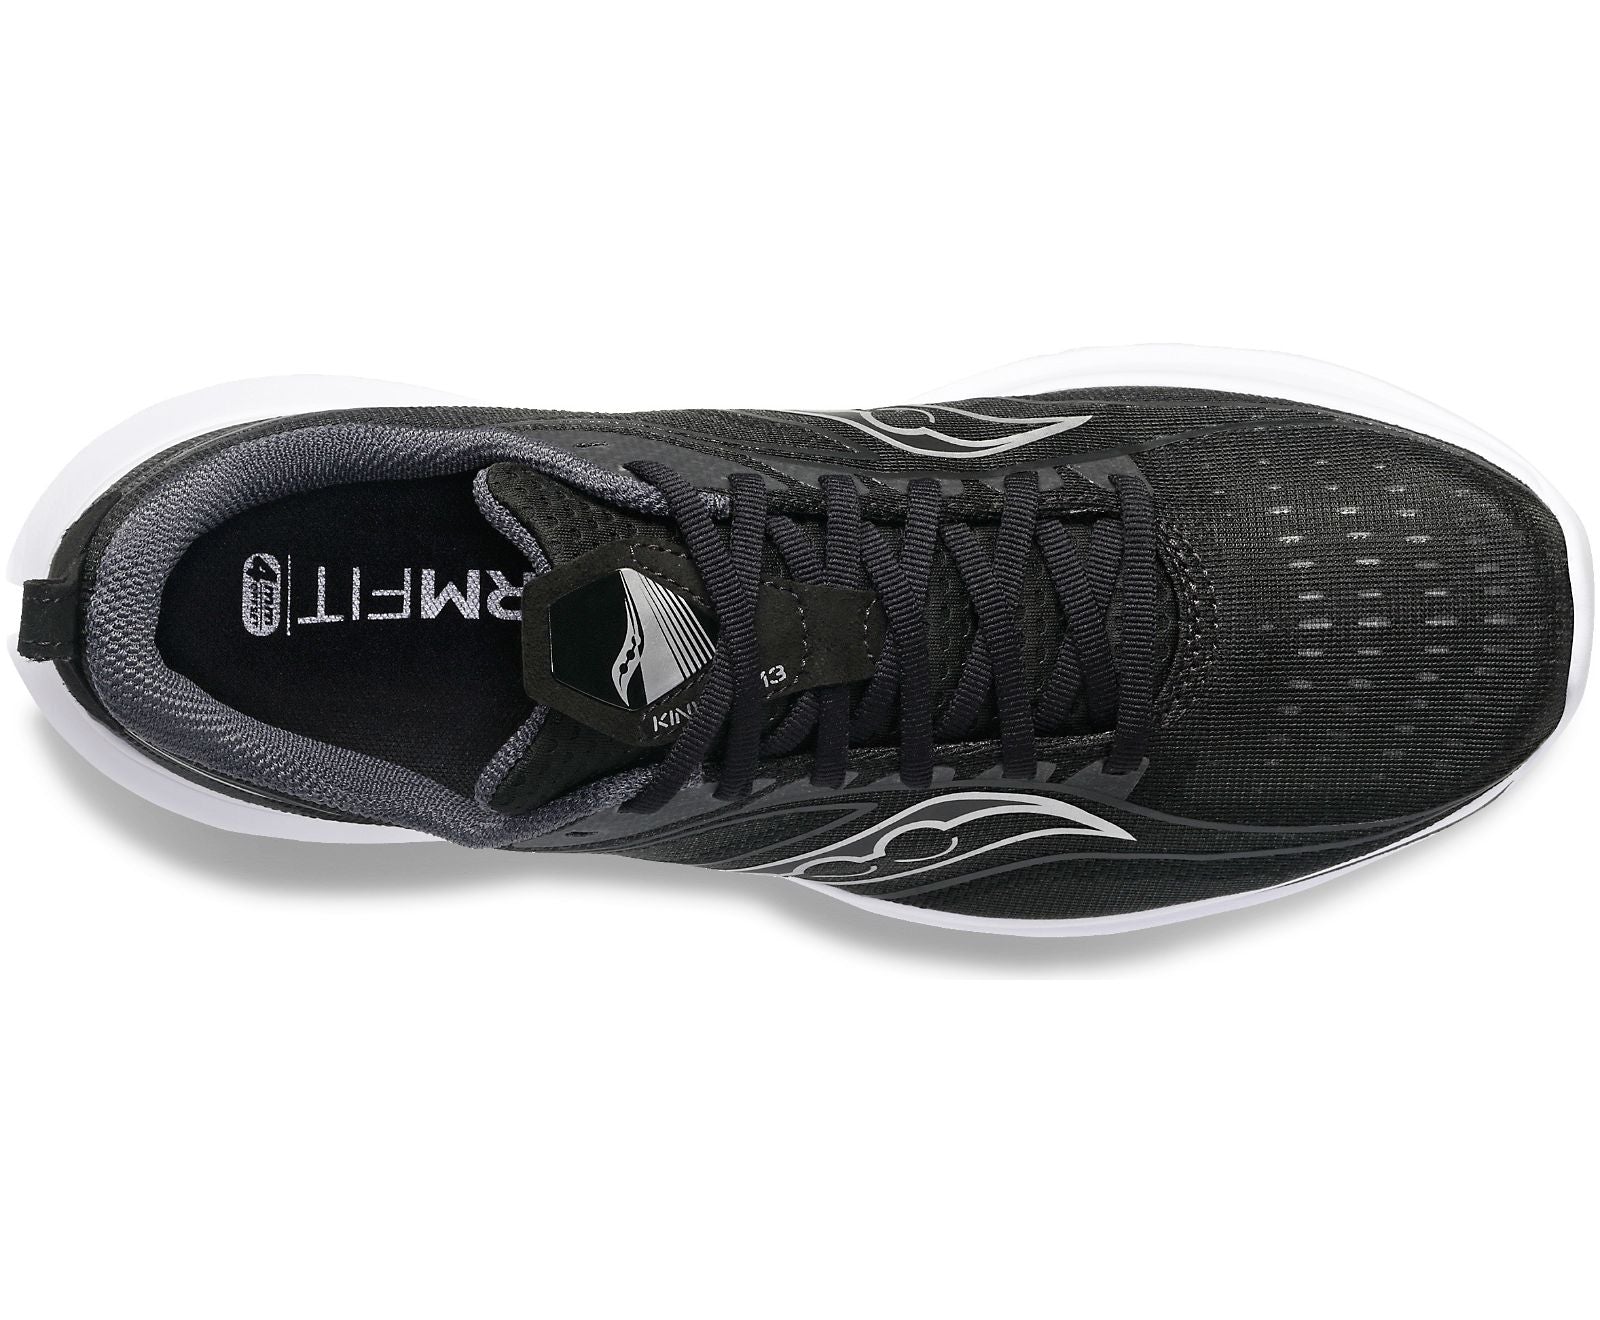 Top view of the Men's Kinvara 13 by Saucony in Black/Silver